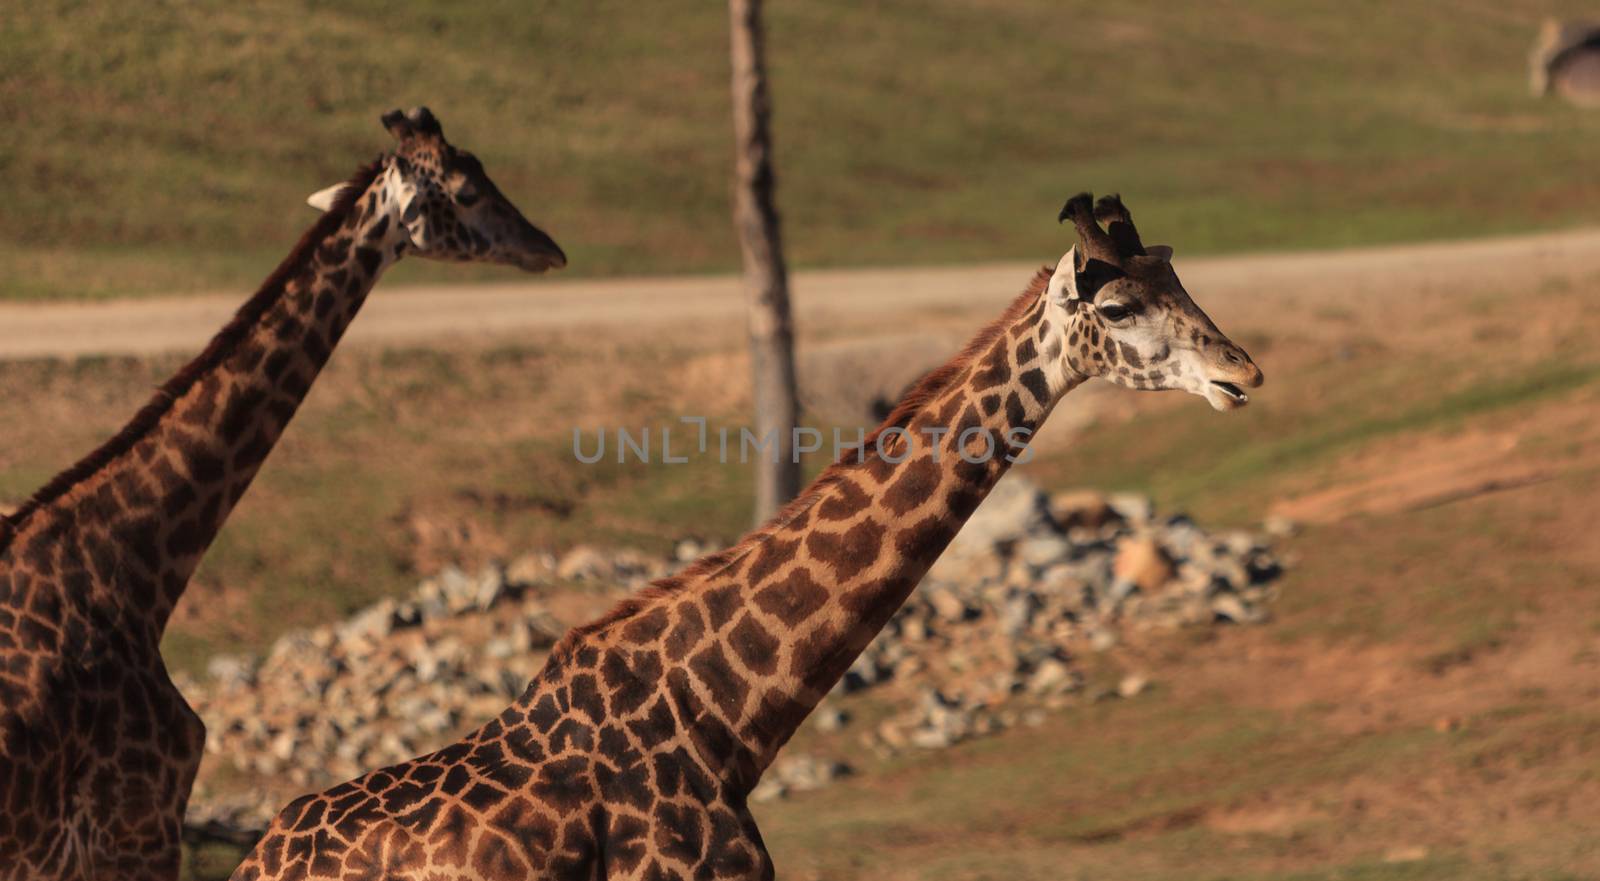 Giraffes, Giraffa camelopardalis, are found in Africa have long necks to help them eat the leaves off trees.